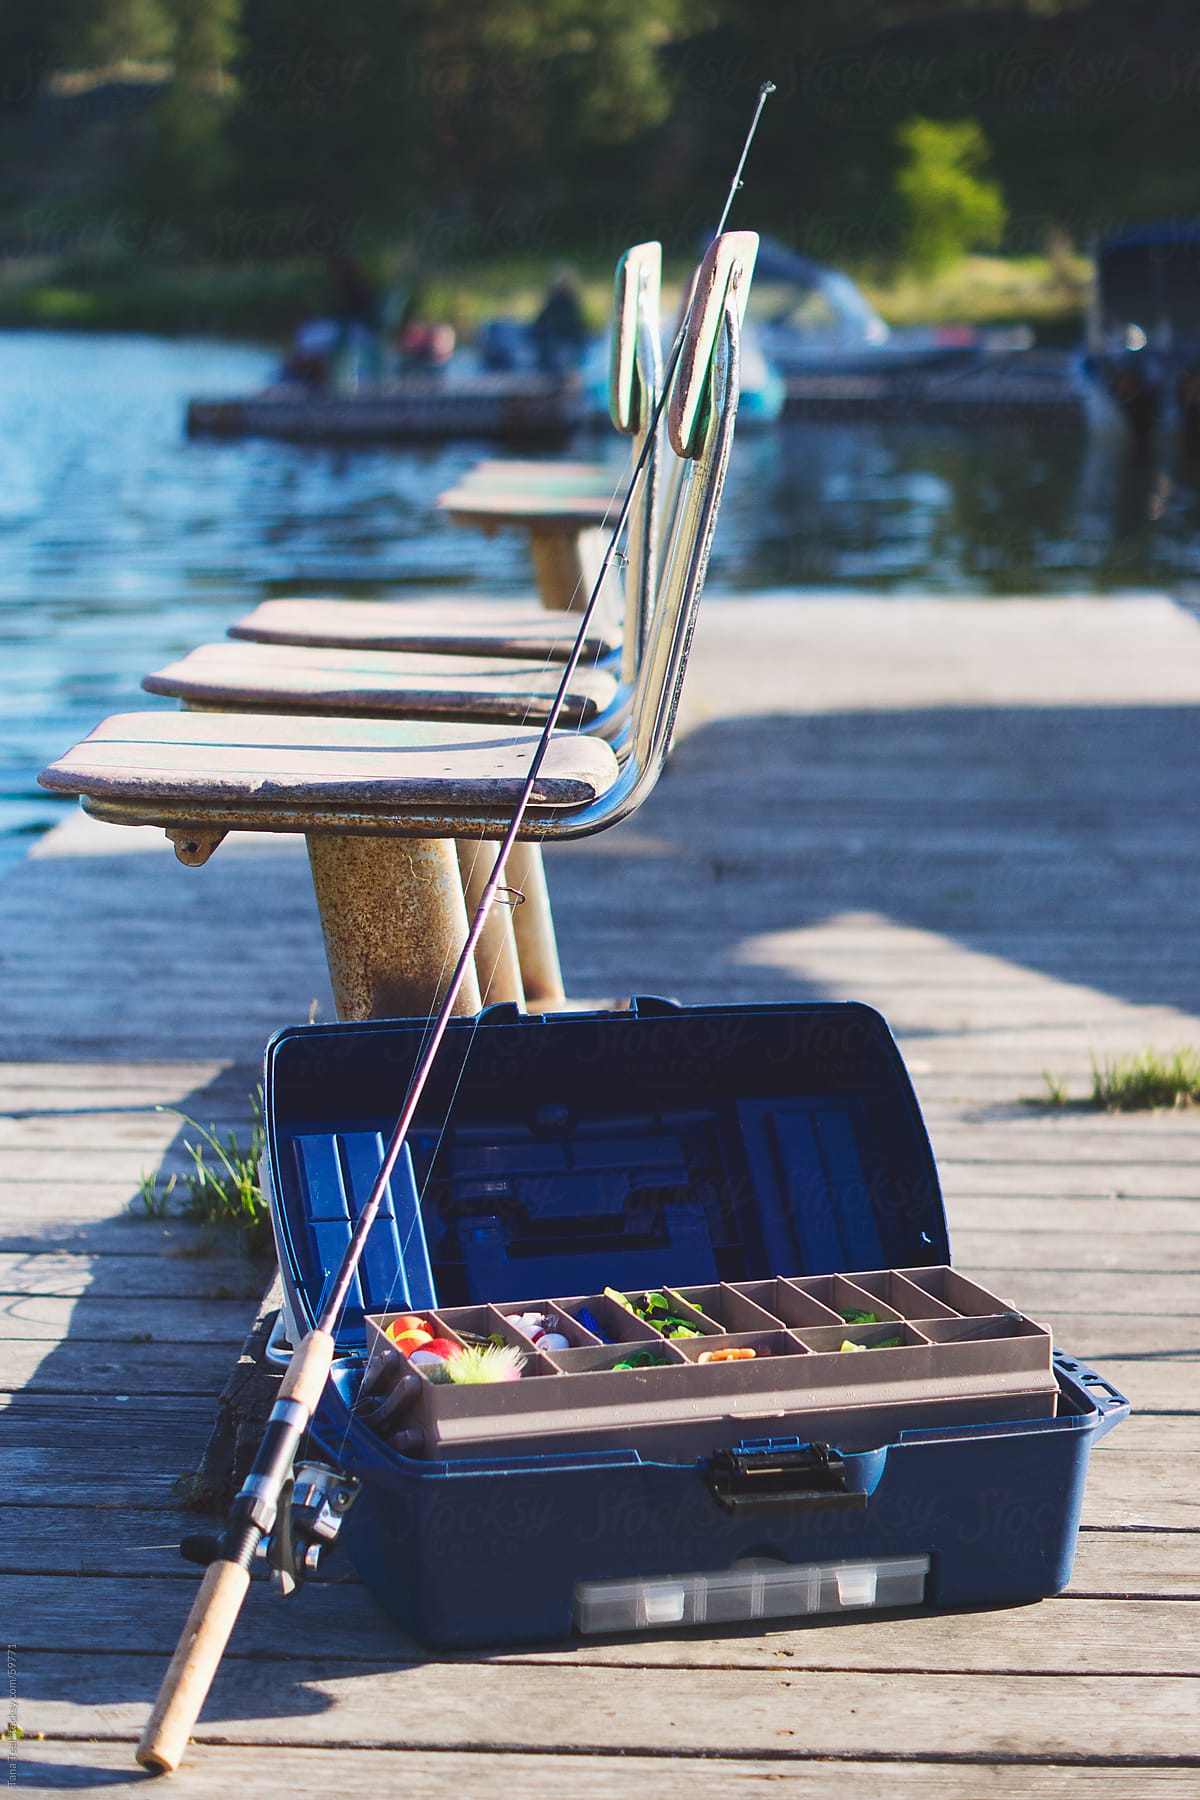 A Fishing Pole Leans Against A Tackle Box Next To Chairs On A